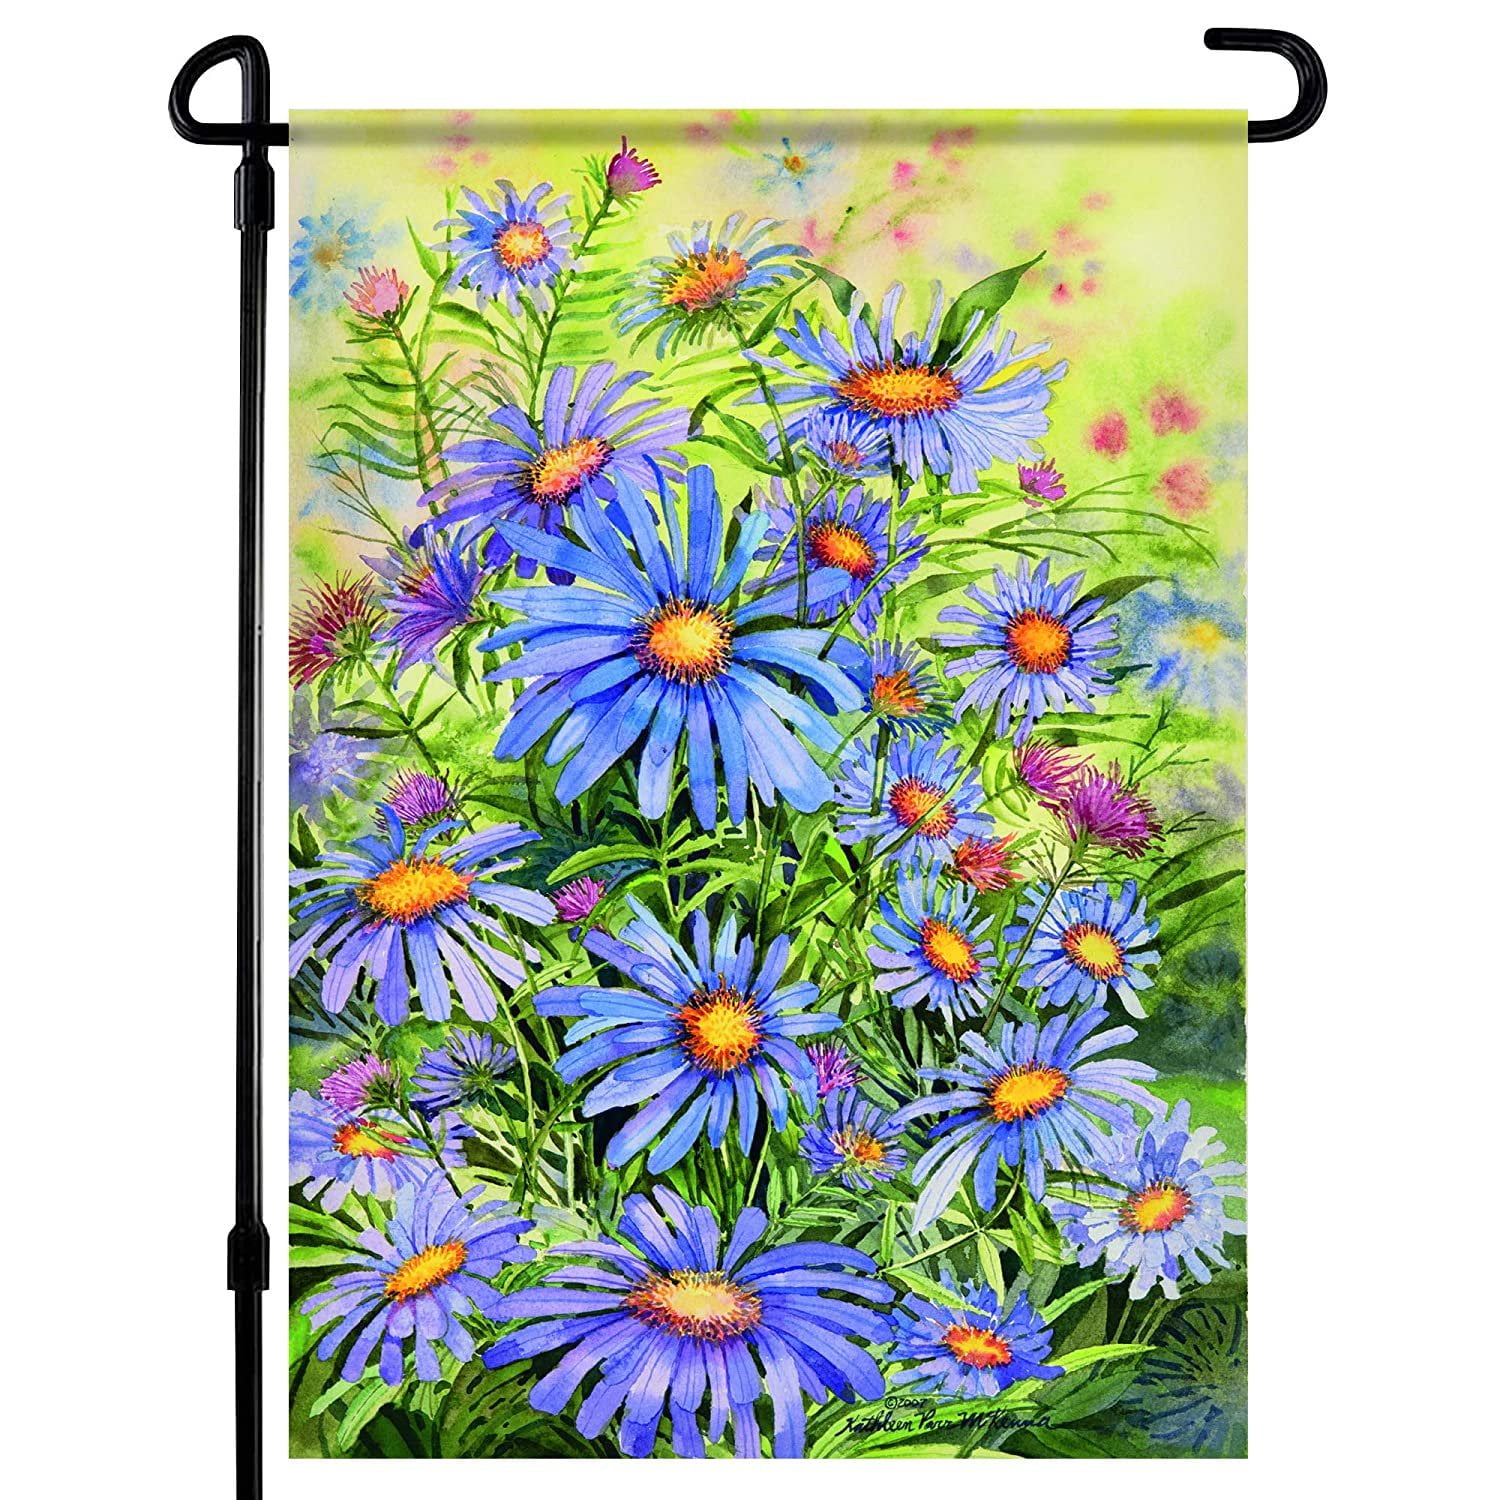 Covido Home Decorative Welcome Spring Garden Flag Daisy Flowers House Yard Lawn